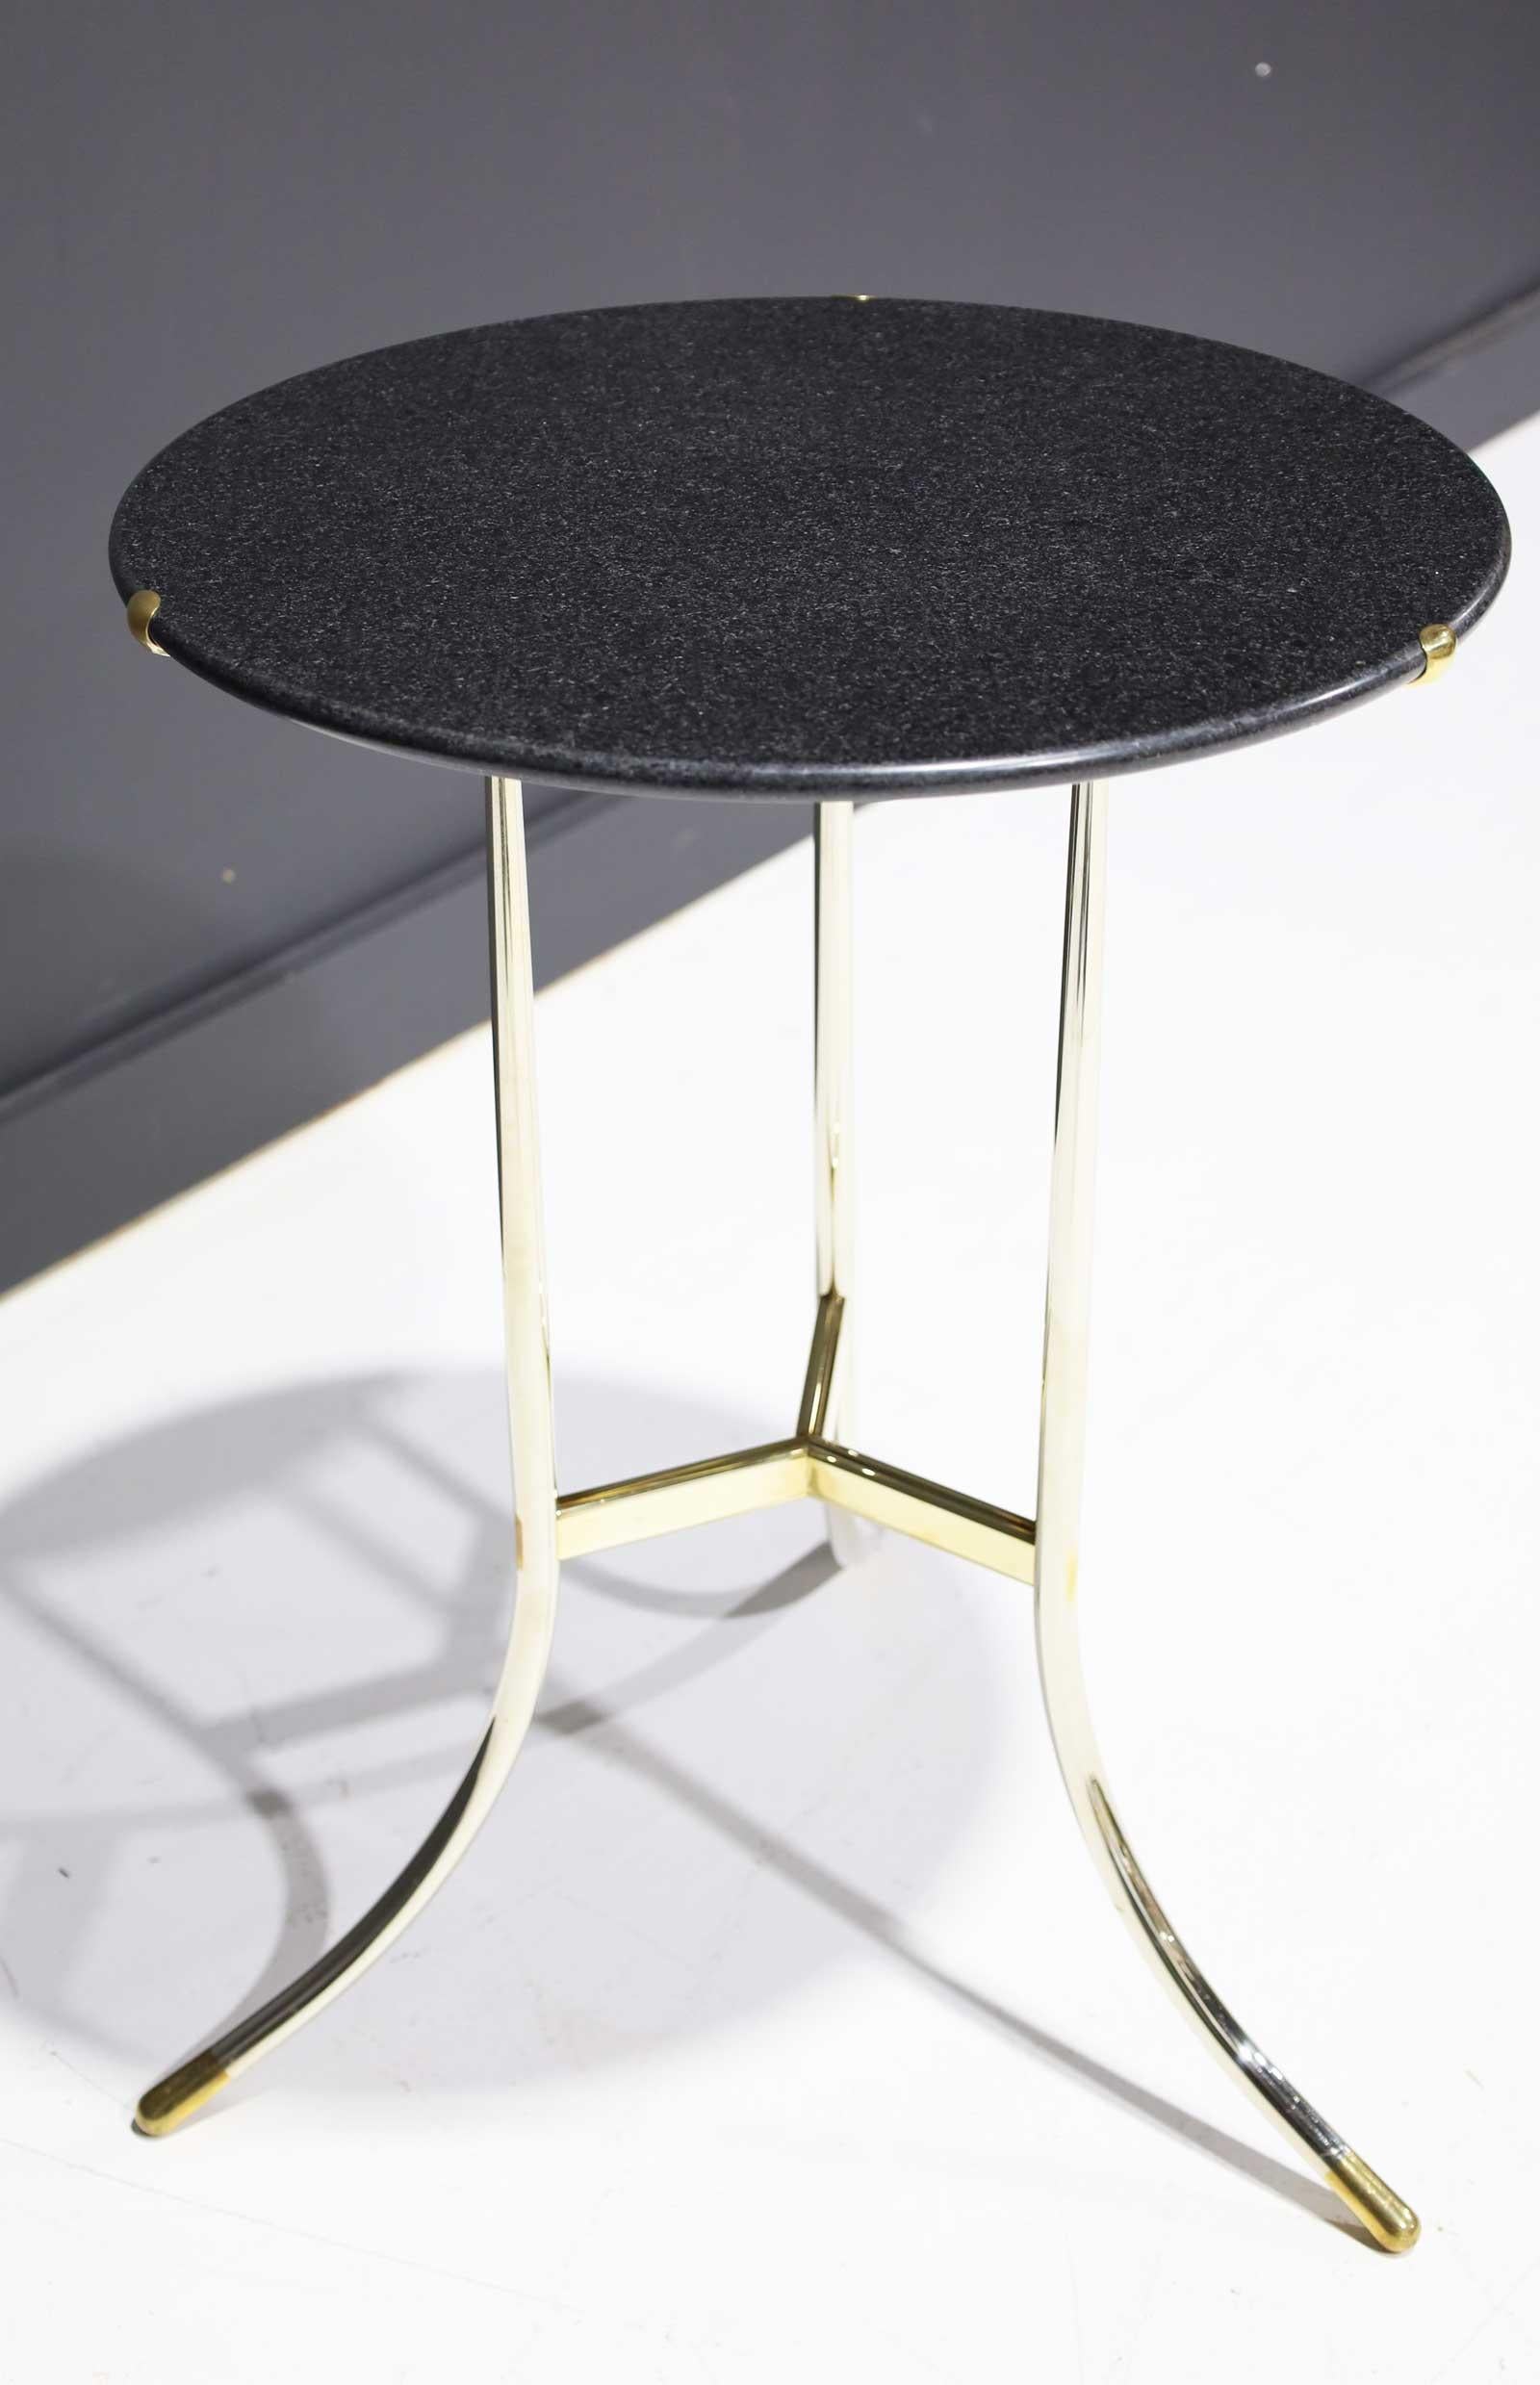 Cedric Hartman Polished Steel and Brass Side Table with Black Granite Top In Good Condition For Sale In Dallas, TX